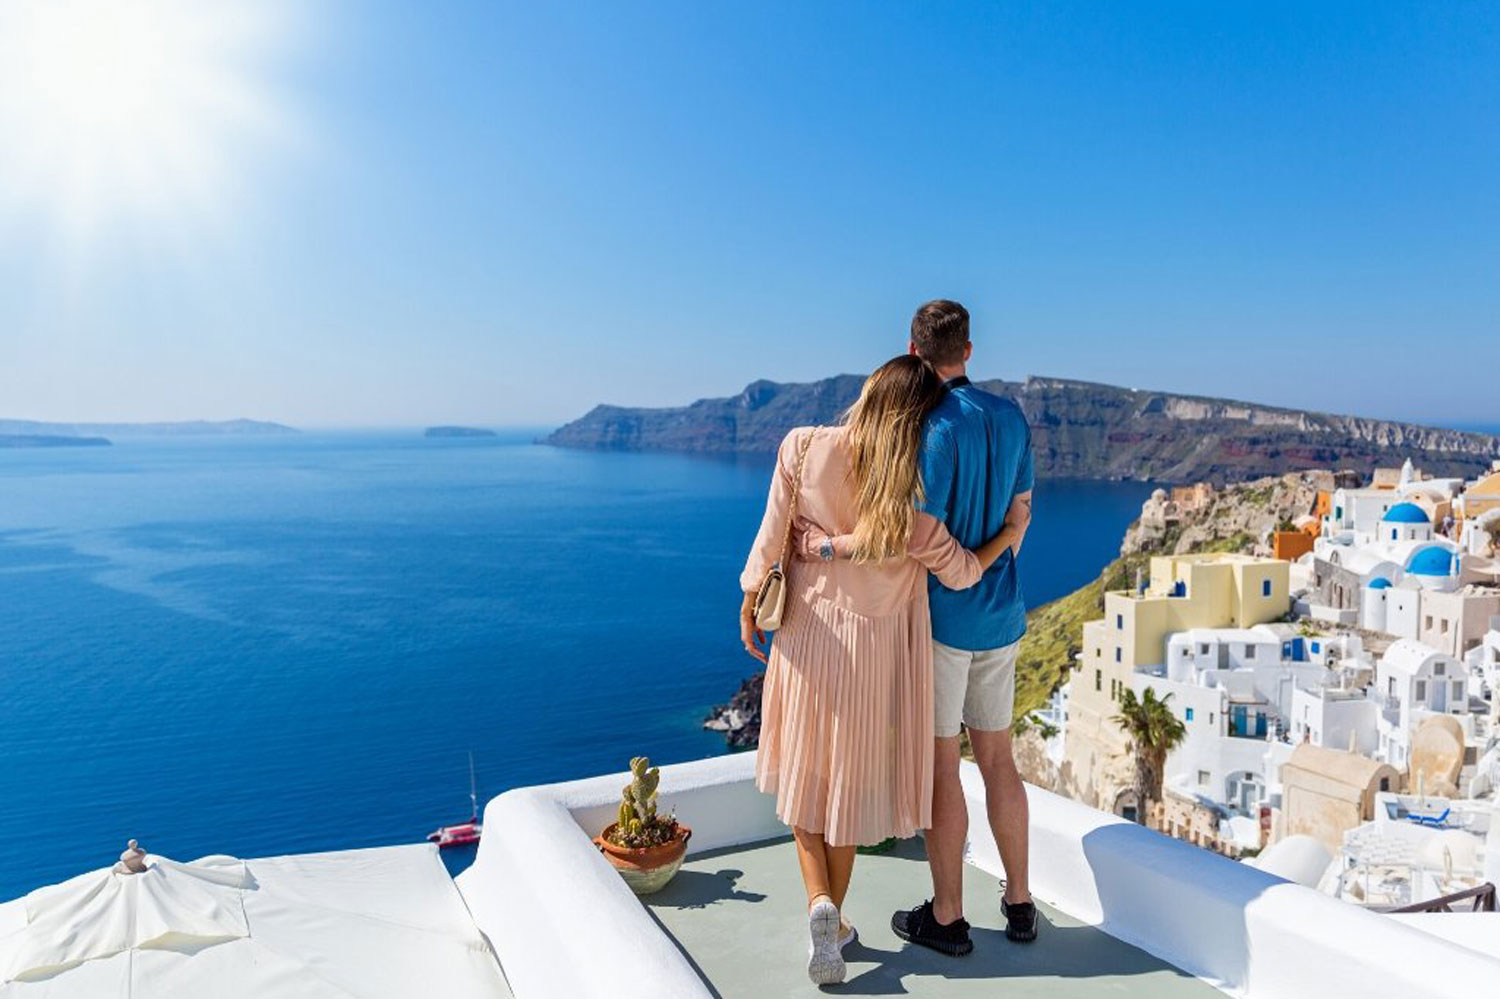 American Family’s ‘Greek Vacation’ Dilemma Shows Why The US Is Not Ready For Polyamory